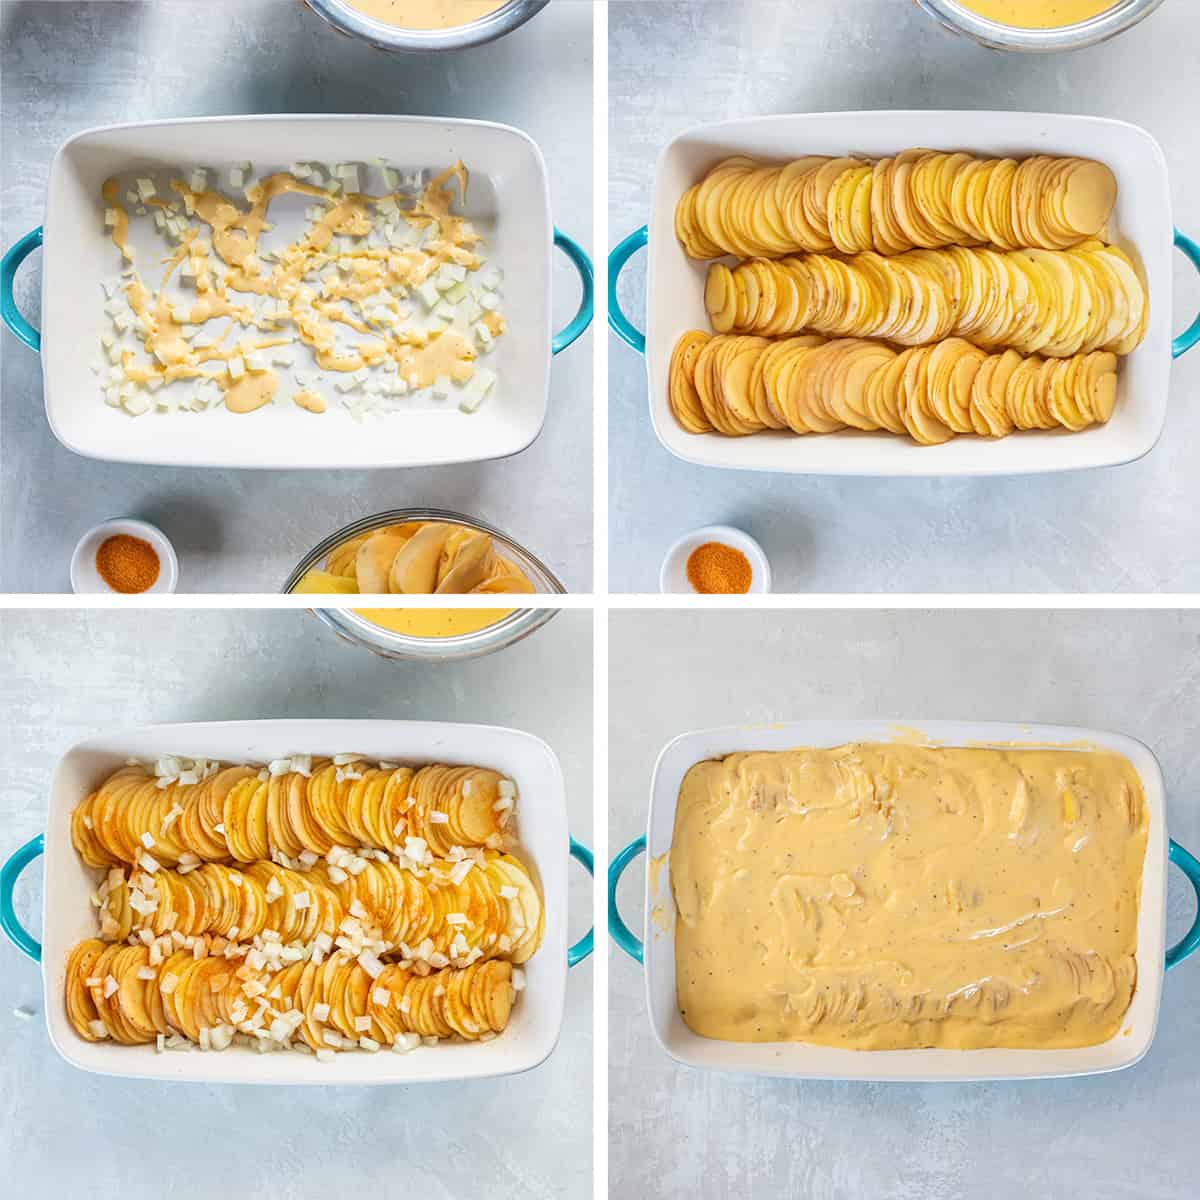 Four images showing onions and potatoes layered in a baking dish and topped with cheese sauce.